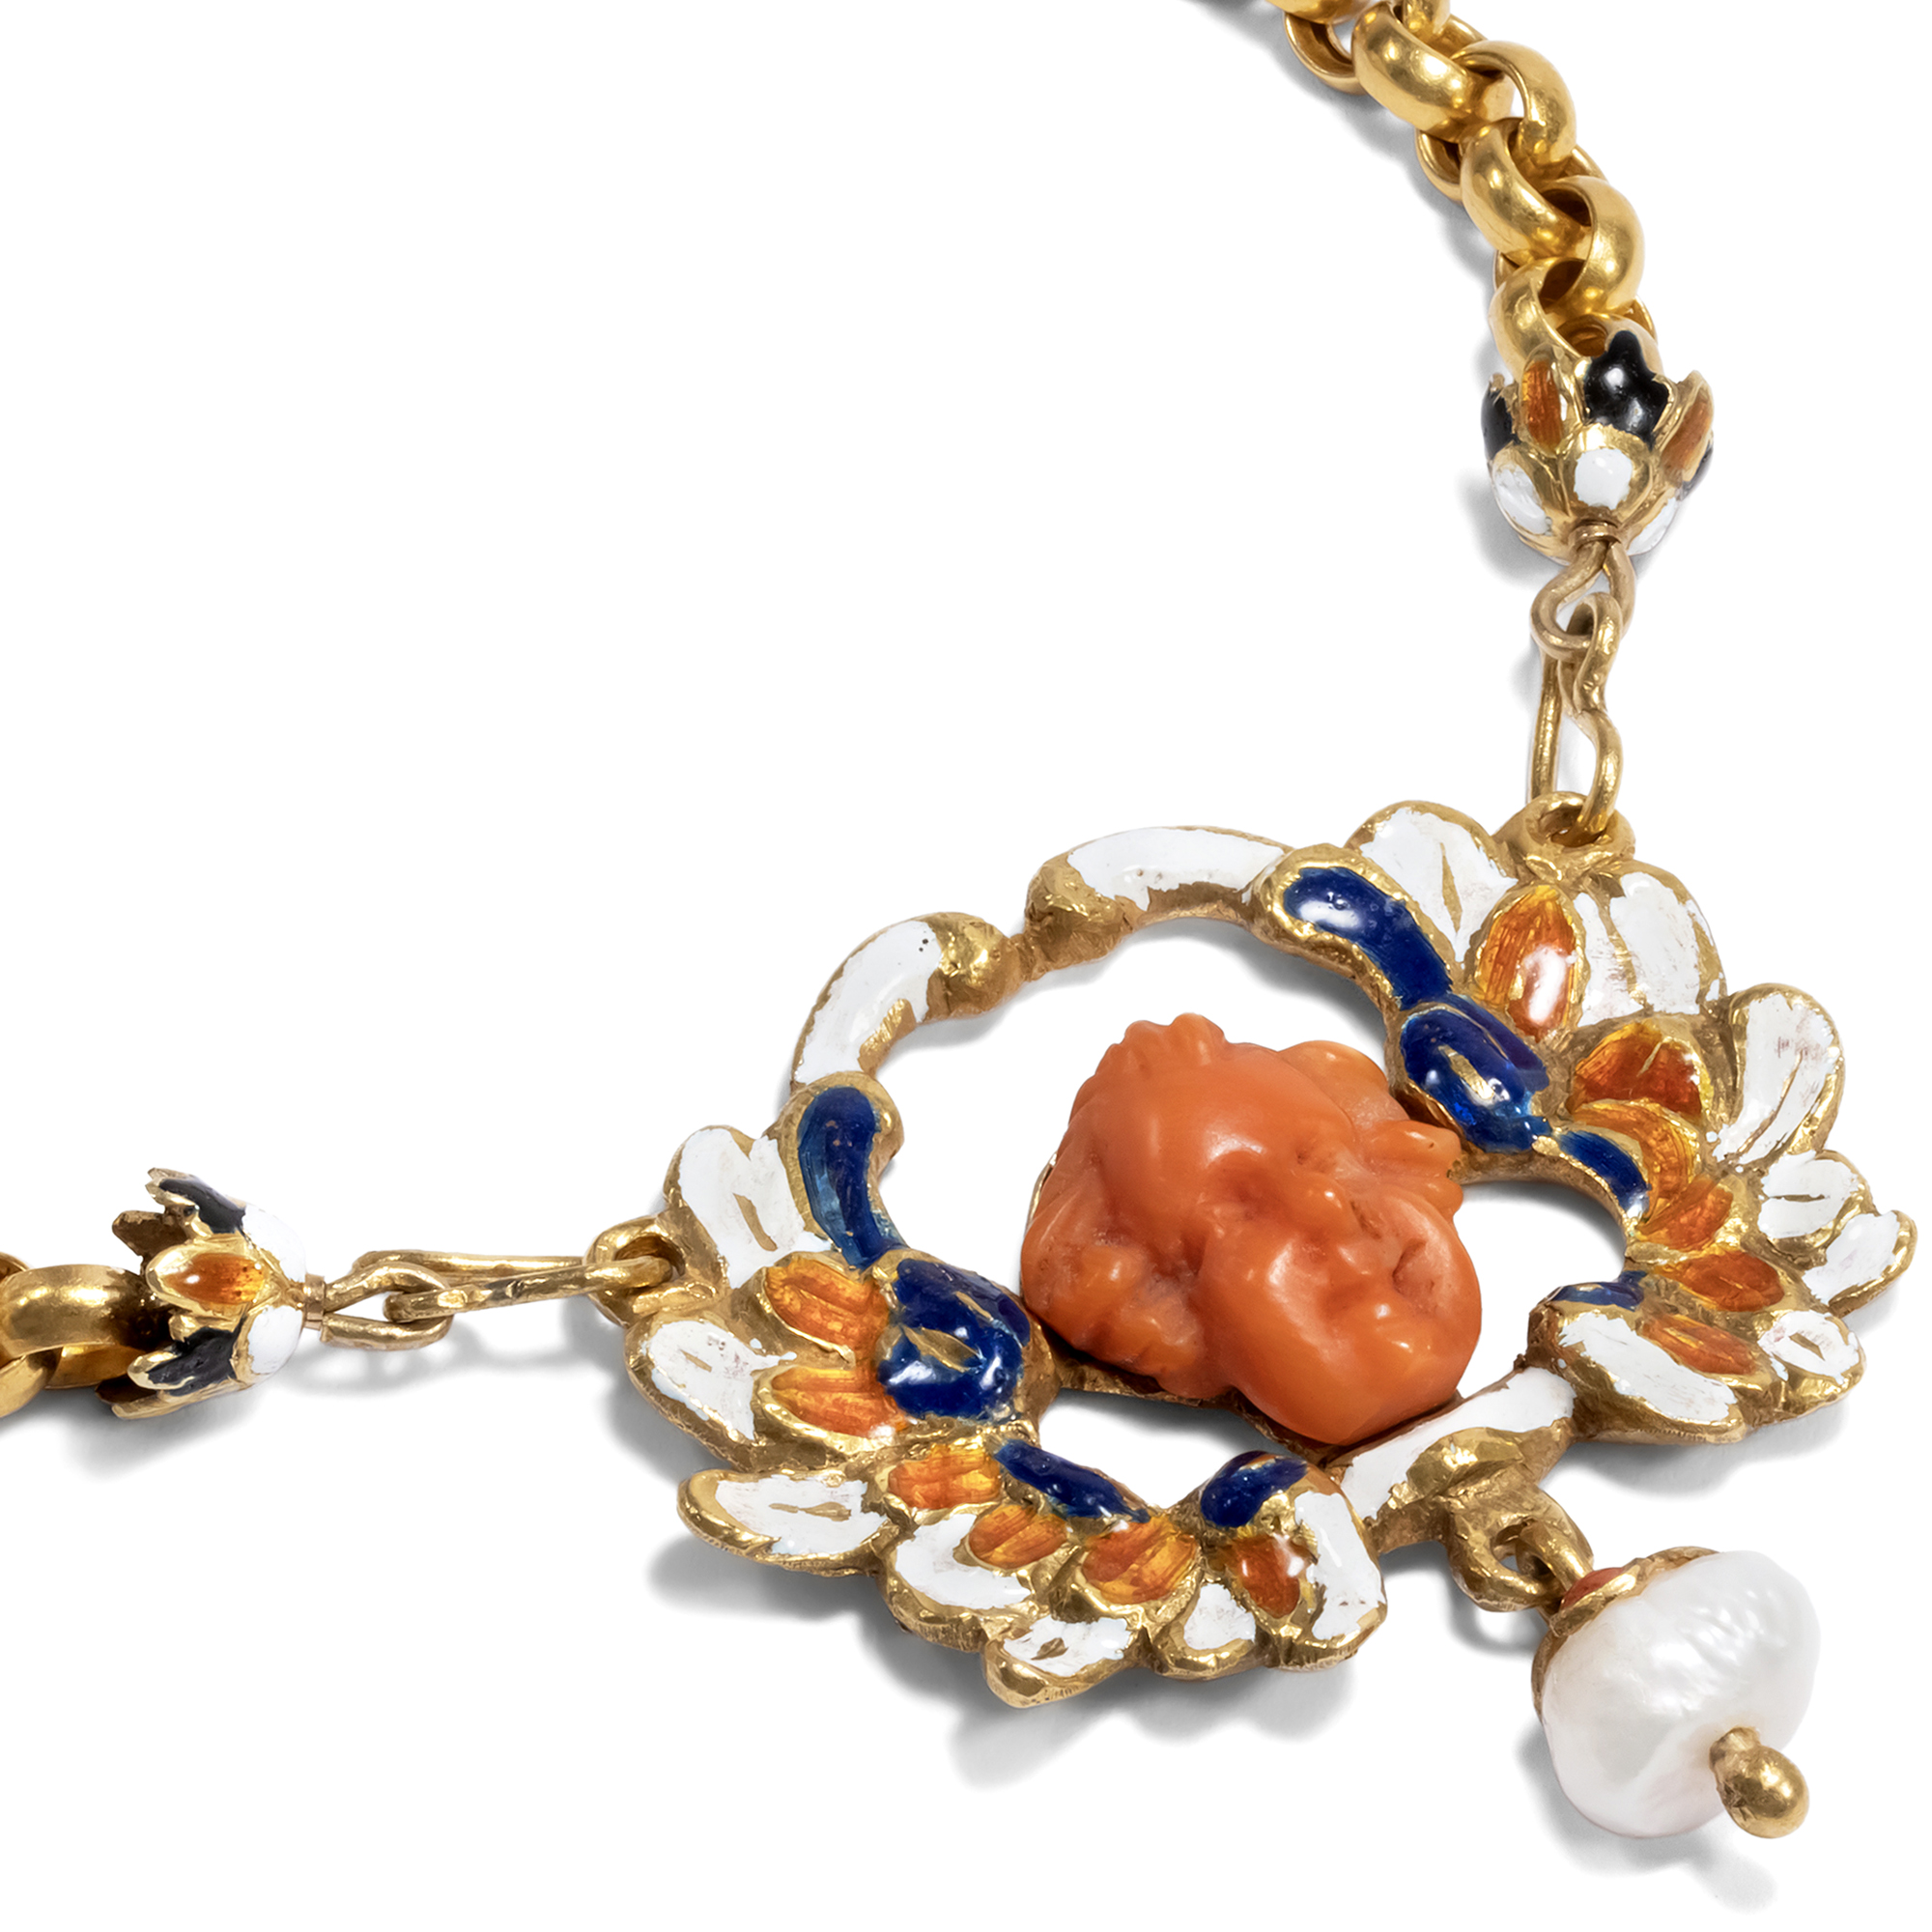 Rare Victorian Necklace with Coral Cameo & Enamel in Gold, ca. 1870